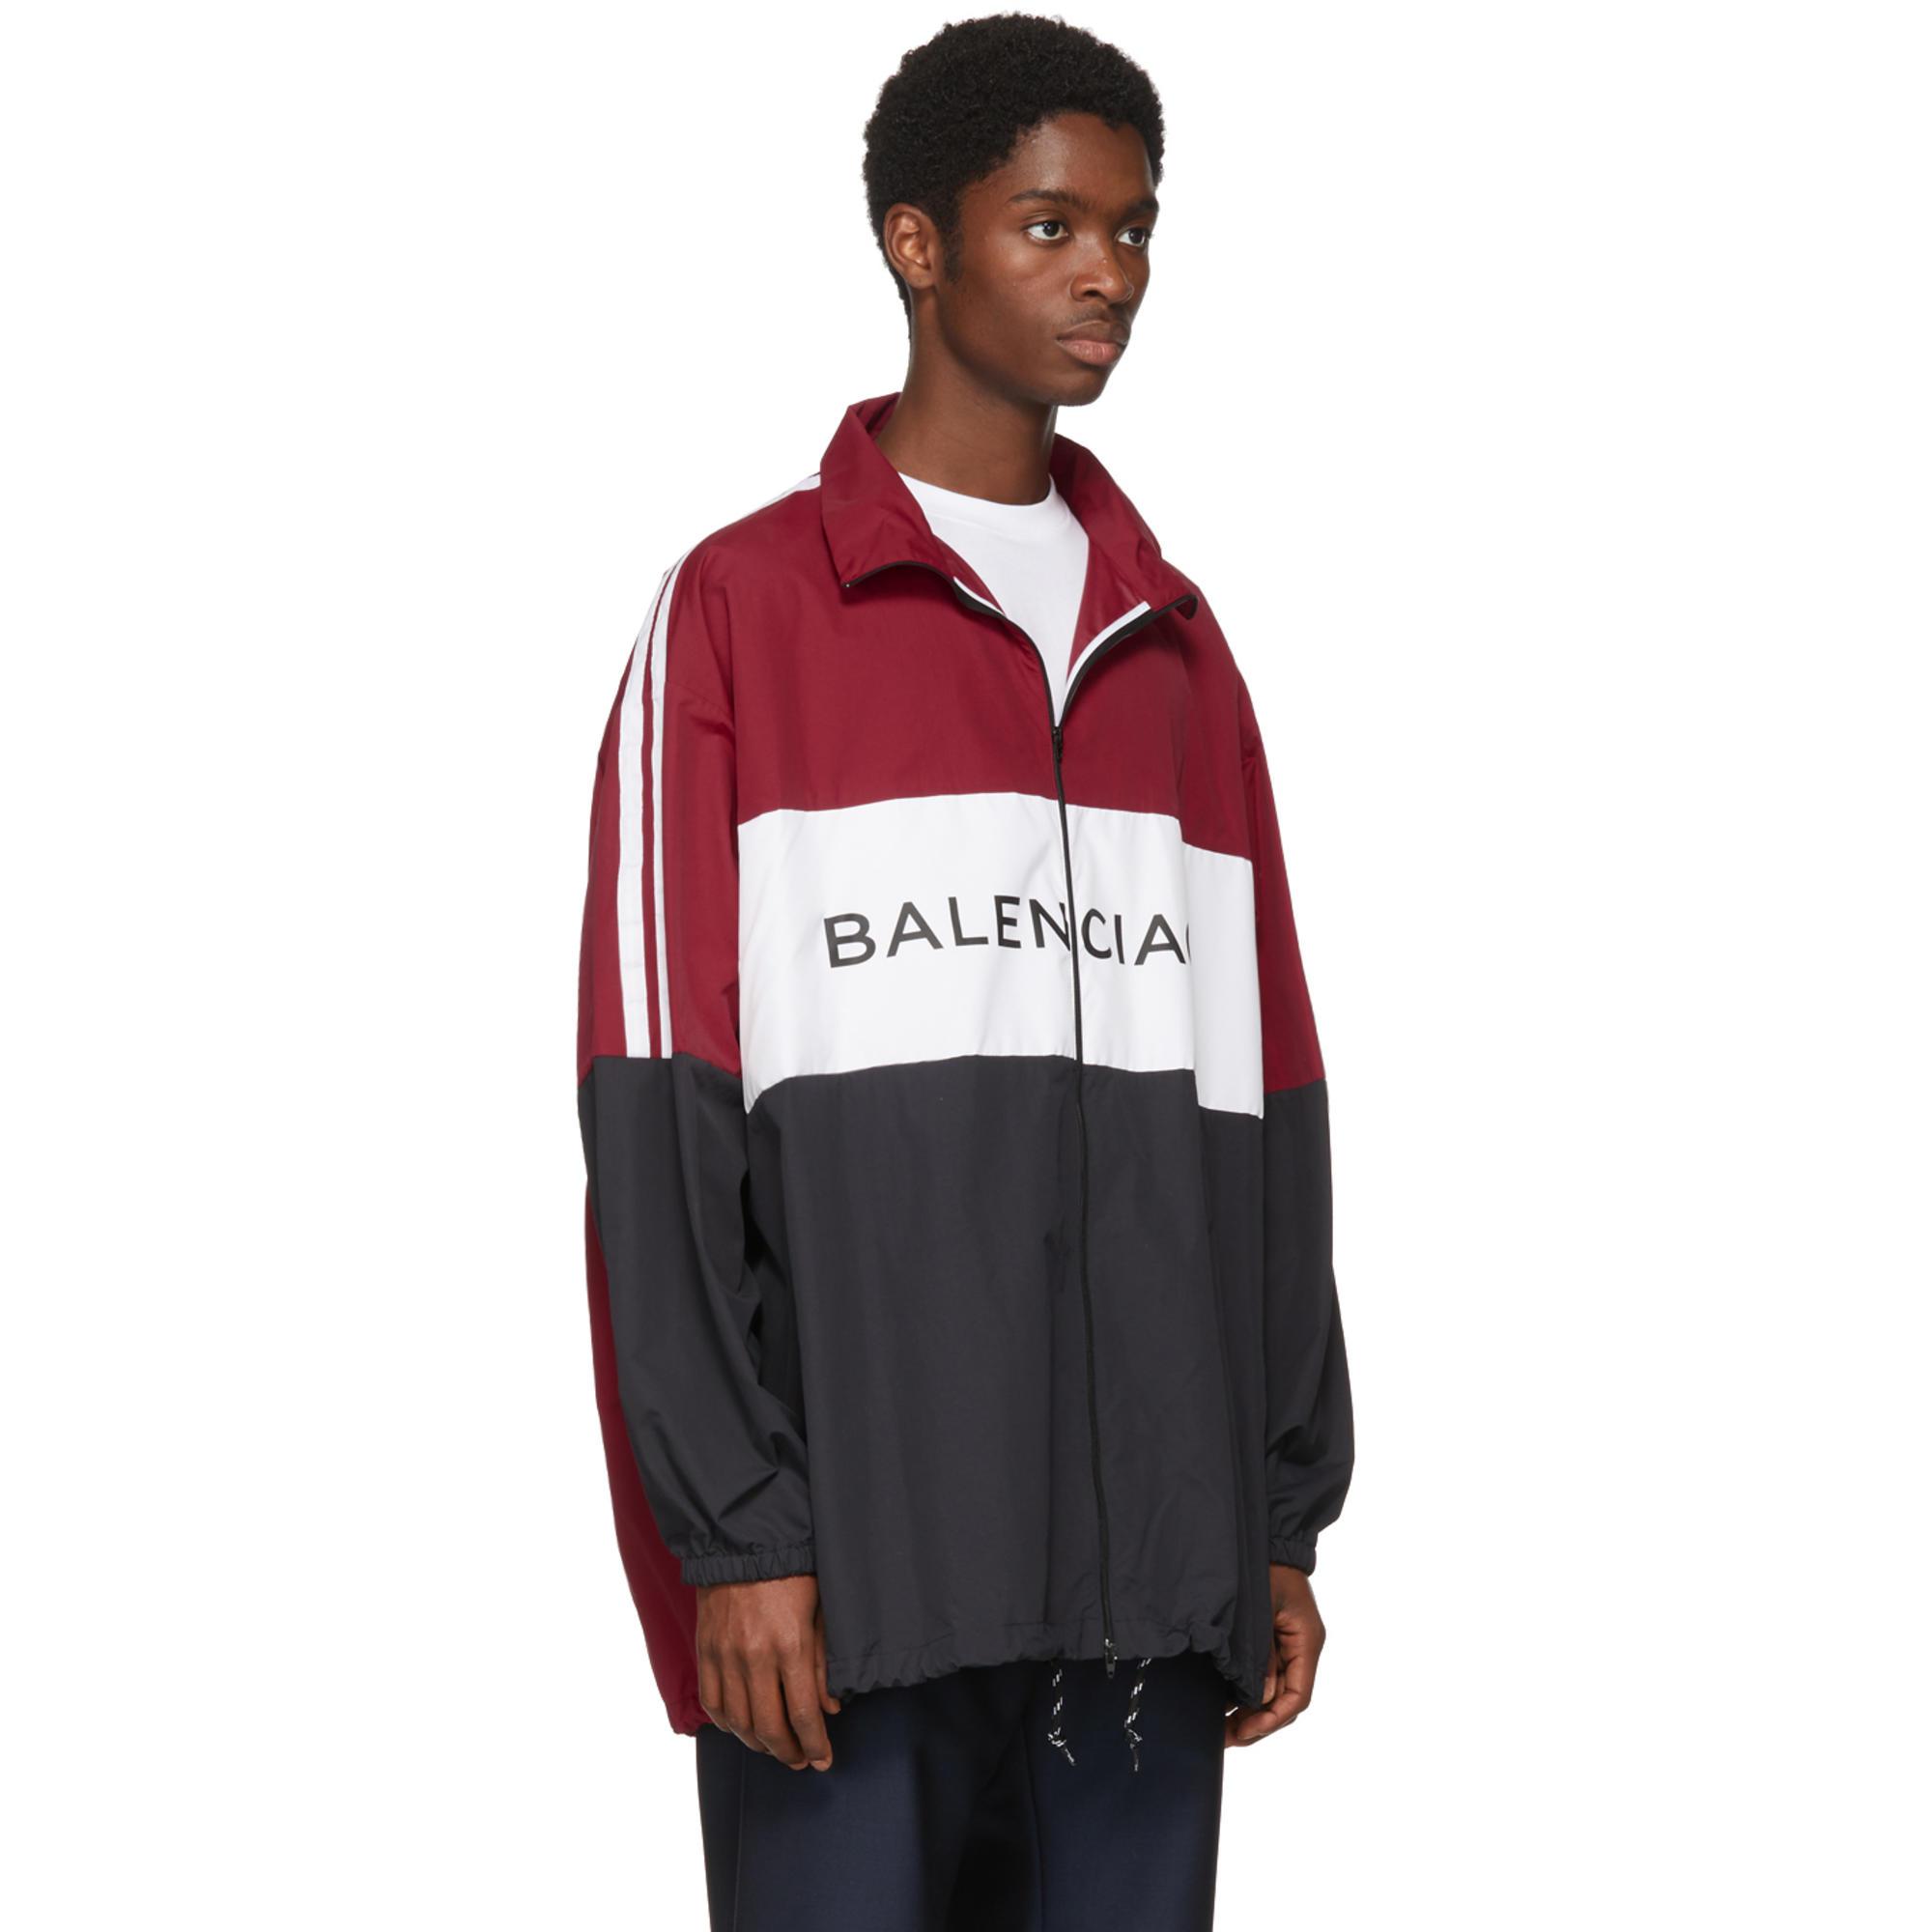 Balenciaga Synthetic Black And Red Logo Track Jacket for Men - Lyst